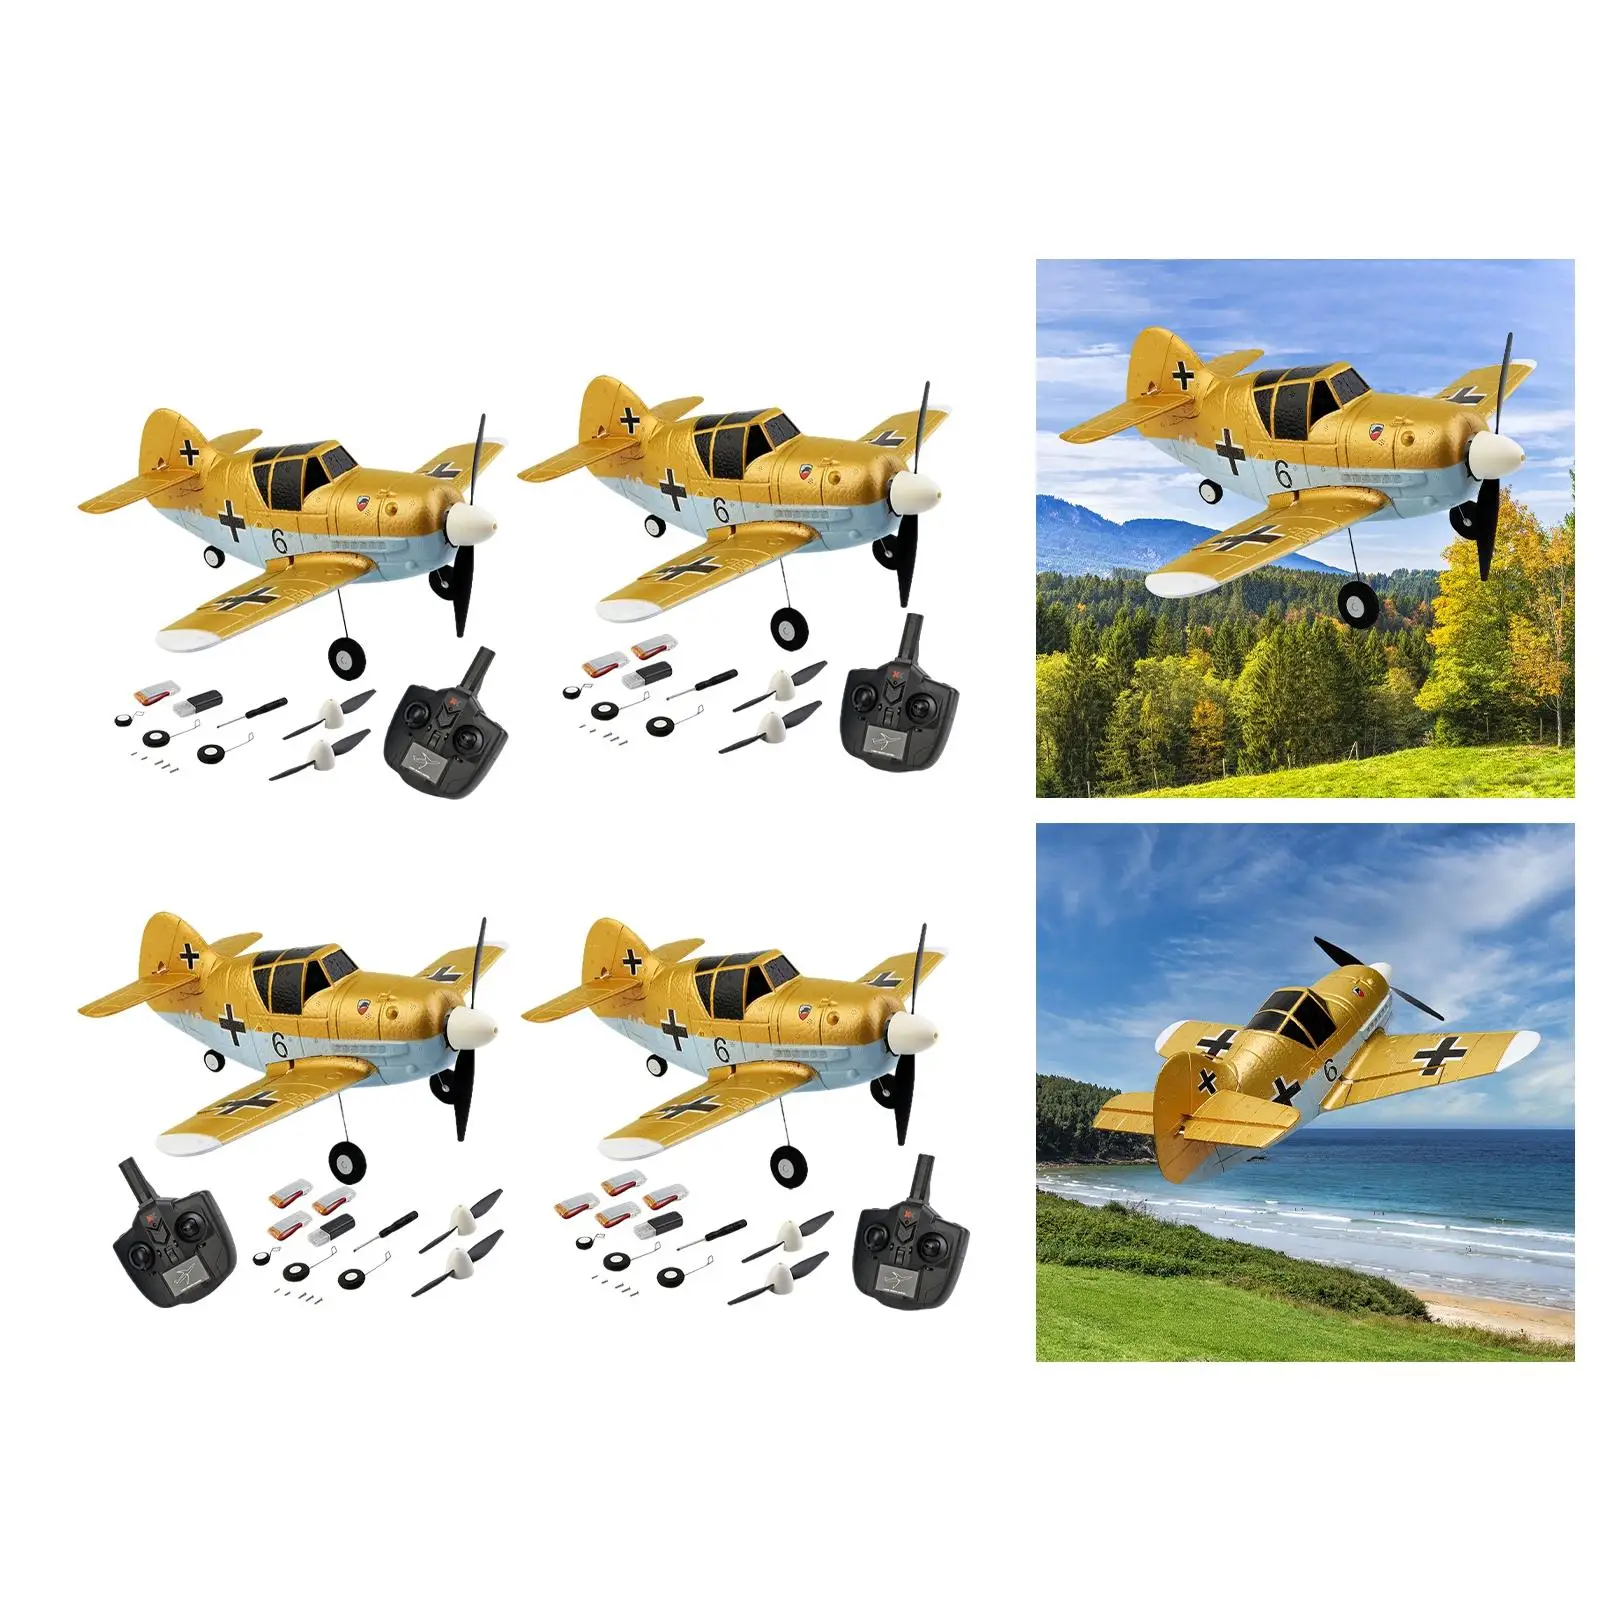 XK A250 RC Plane for Kids, 2.4G 4 Channel Remote Control Airplane Ready to Fly,